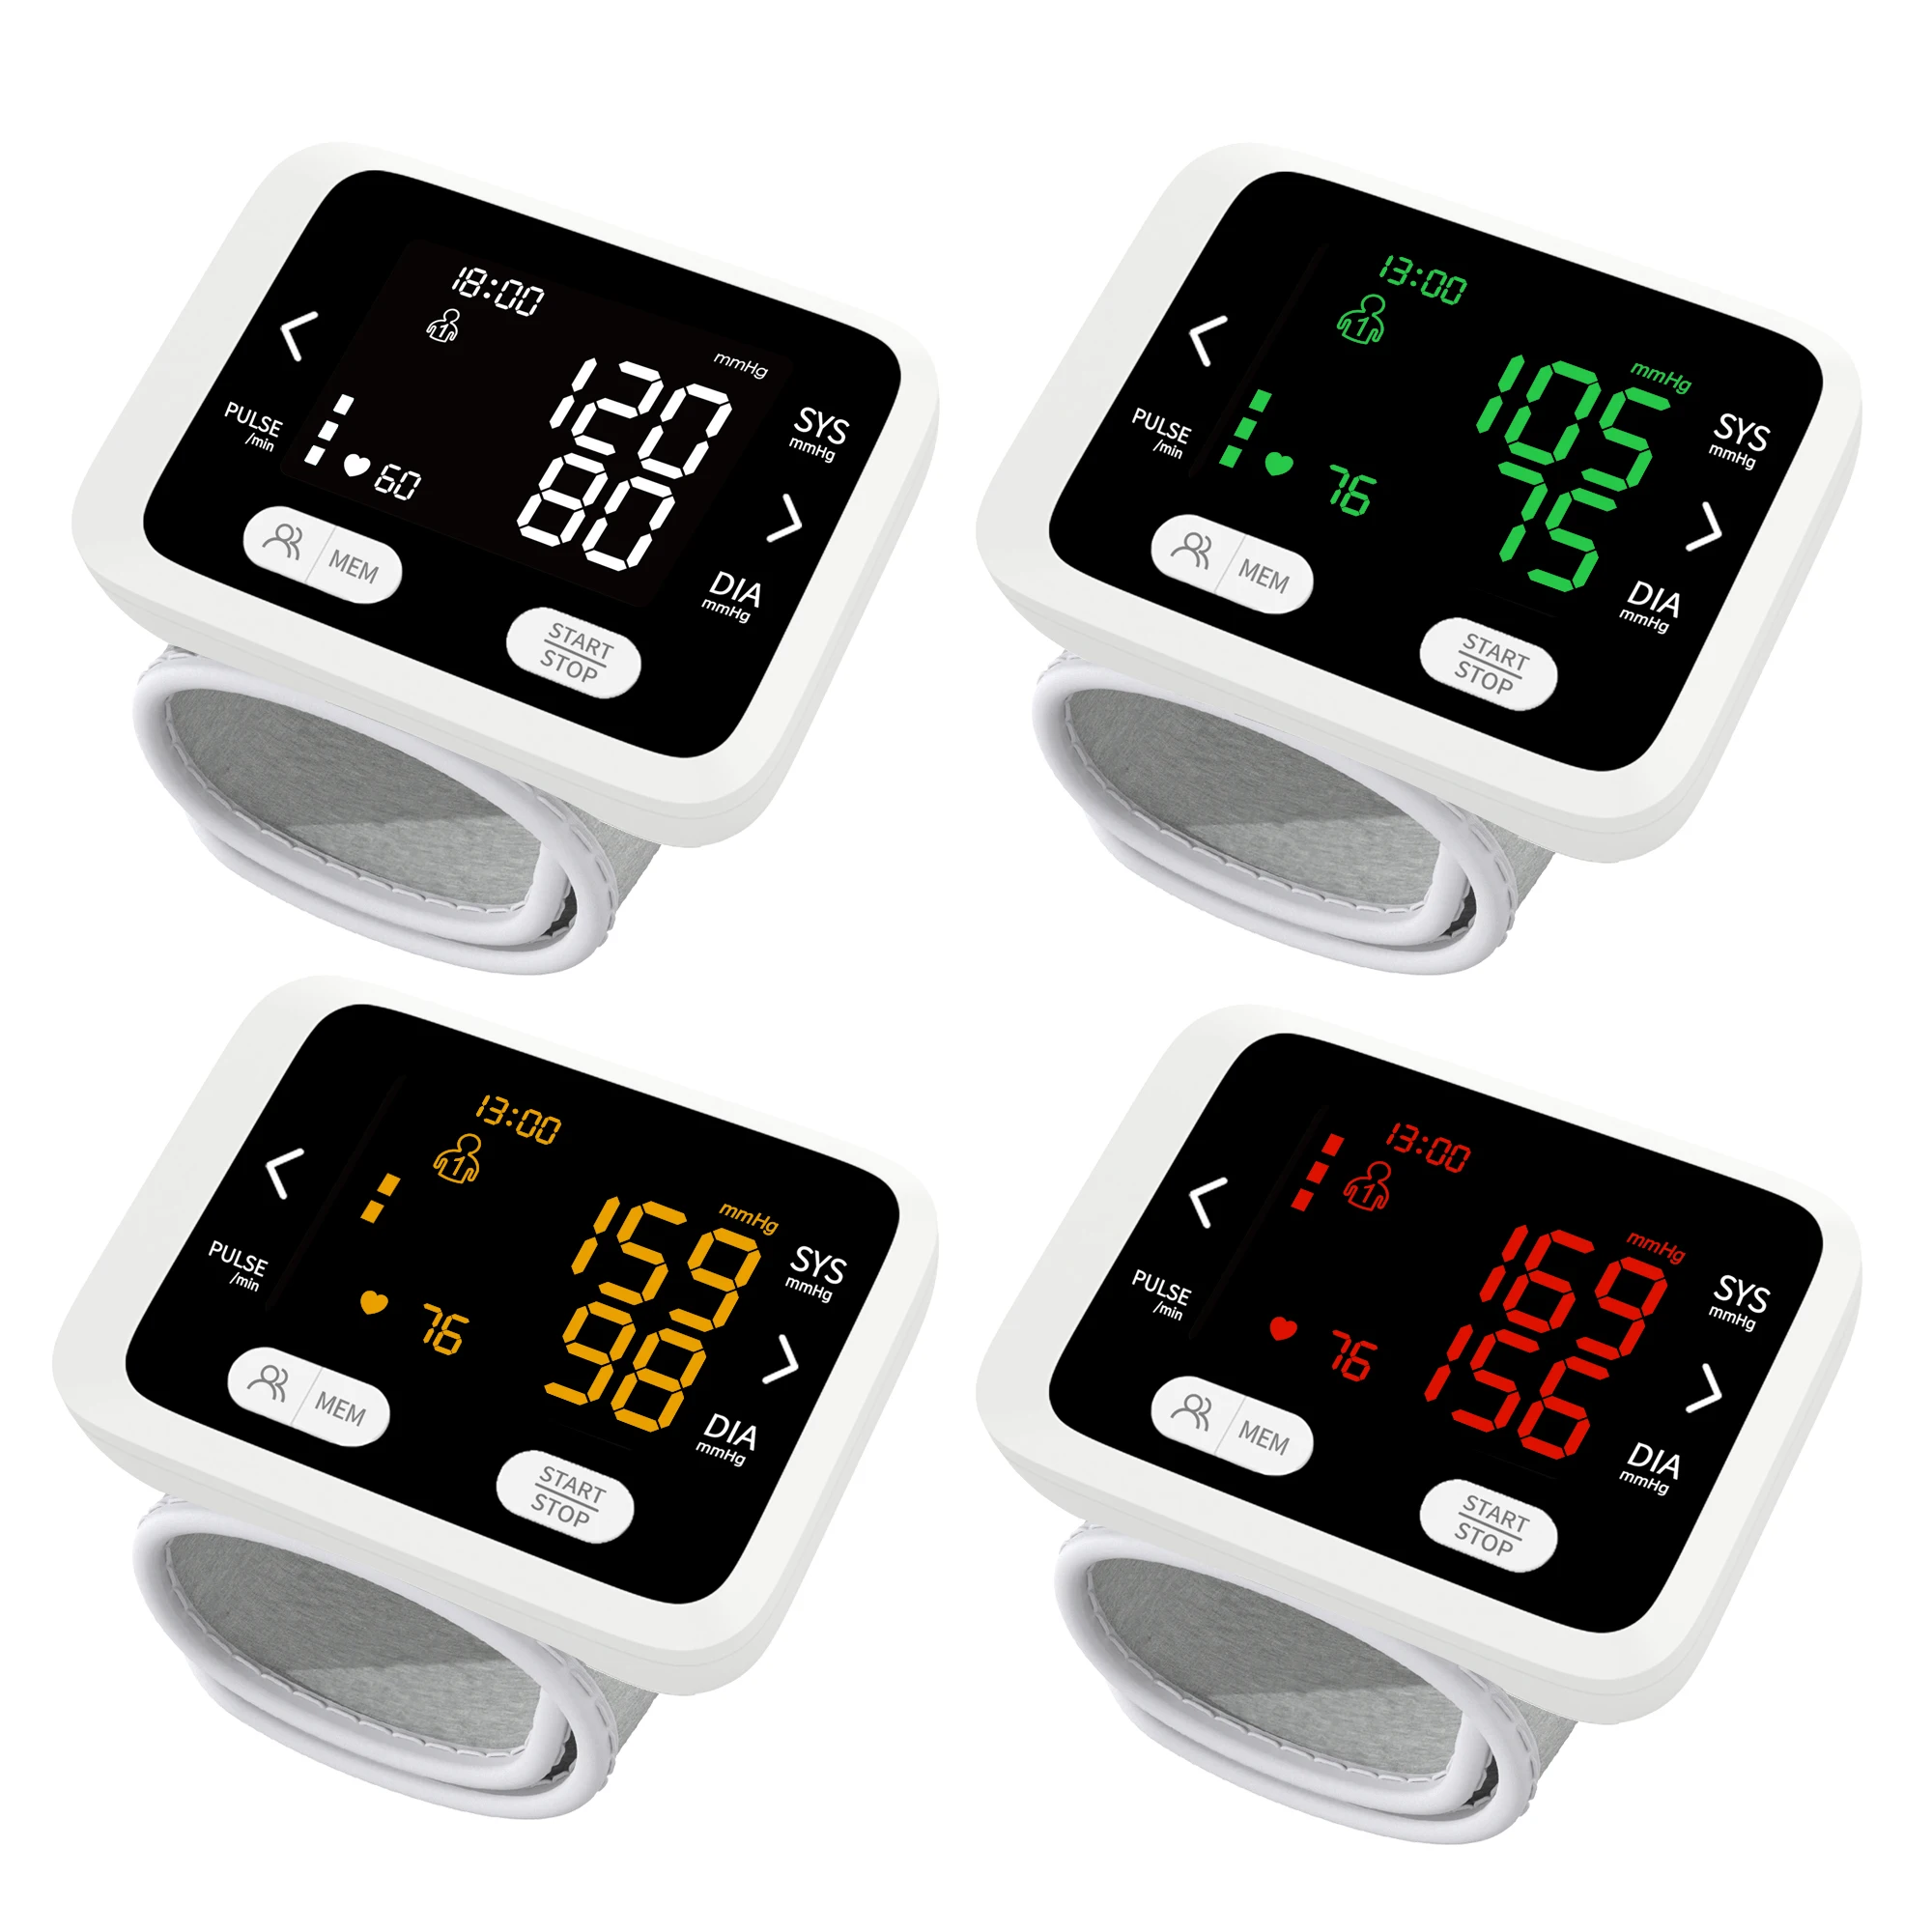 
portable wrist bp electronic blood pressure meter accurate 